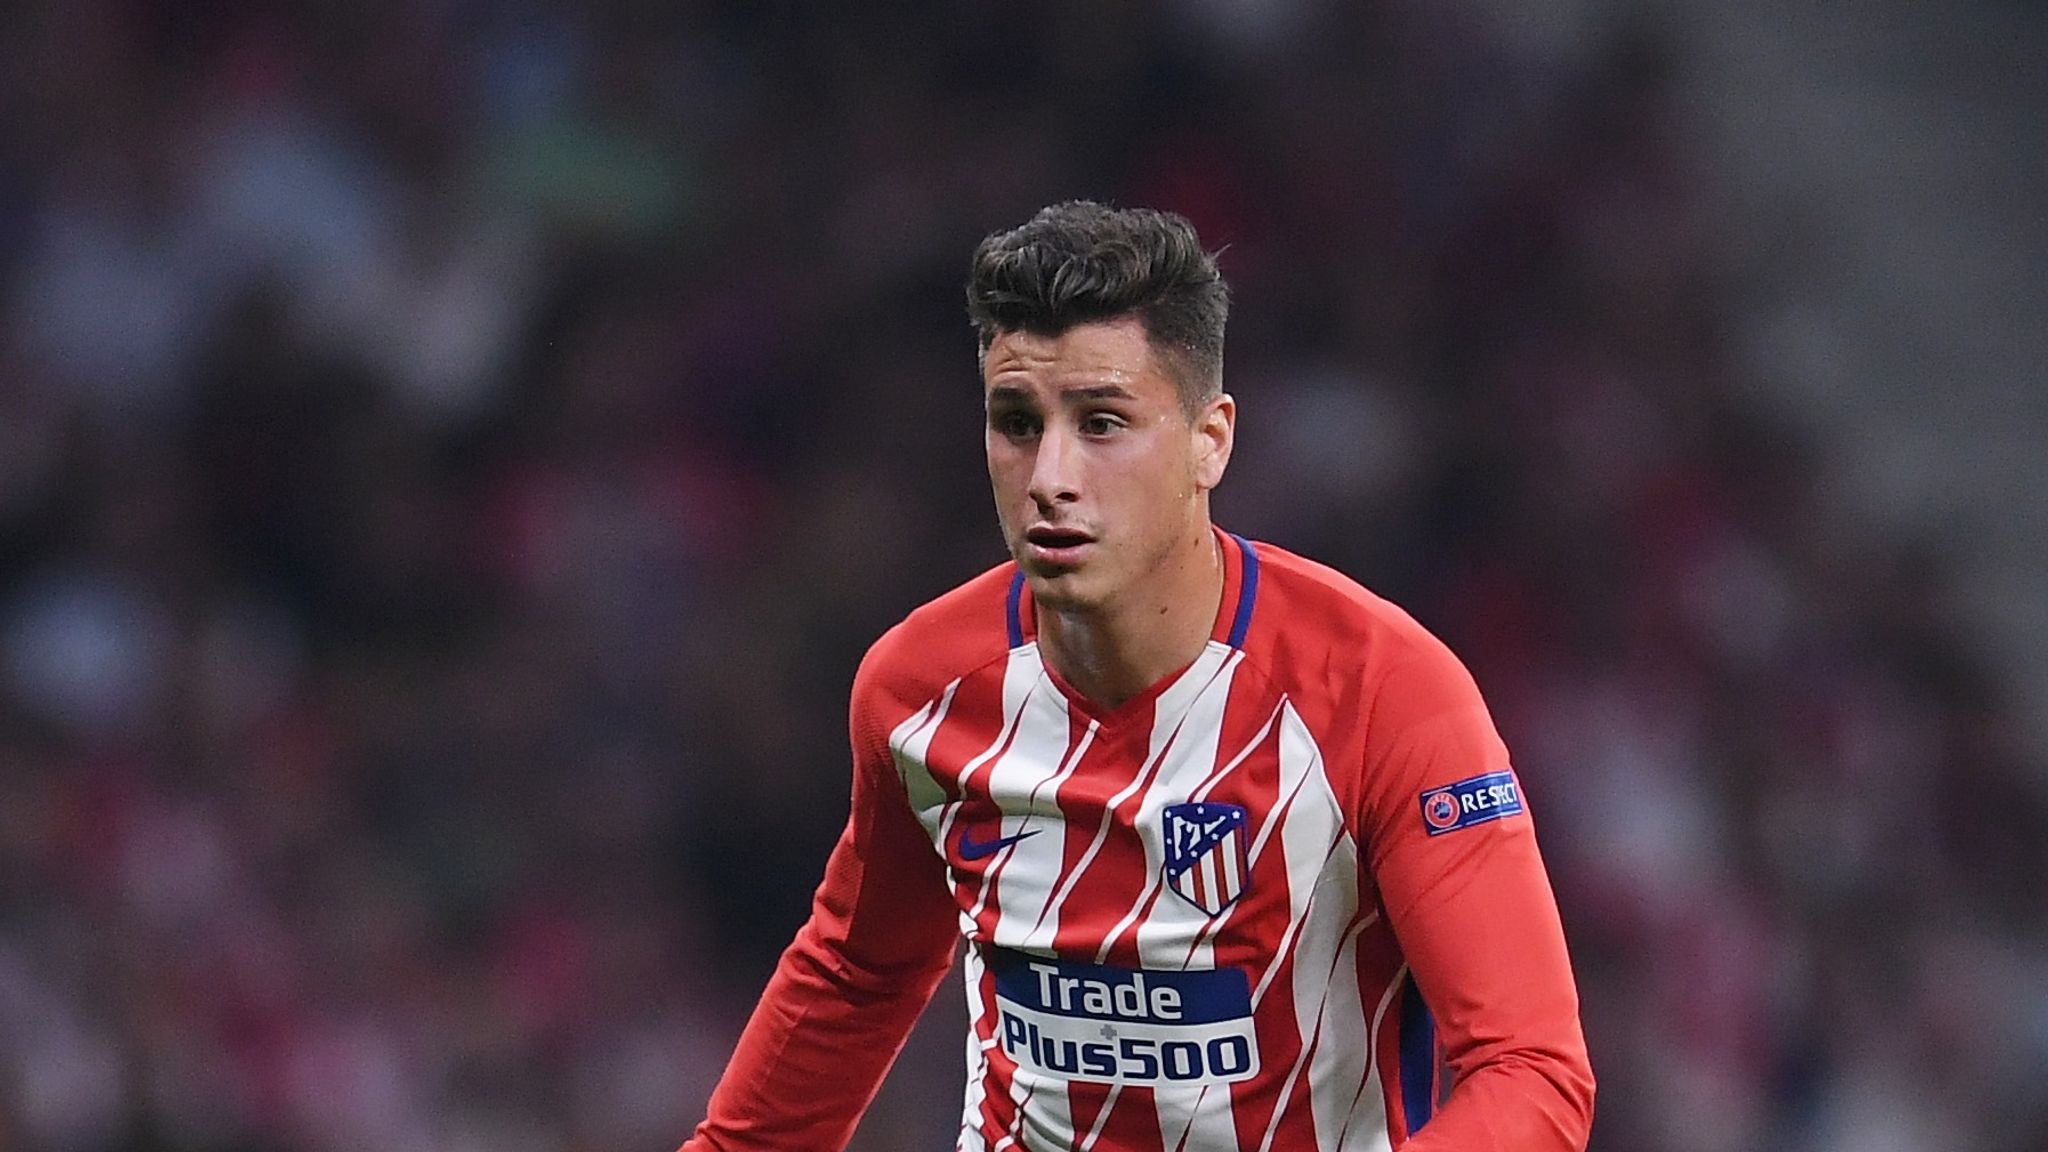 Euro Papers: Atletico Madrid willing to sell Manchester United target Jose Gimenez